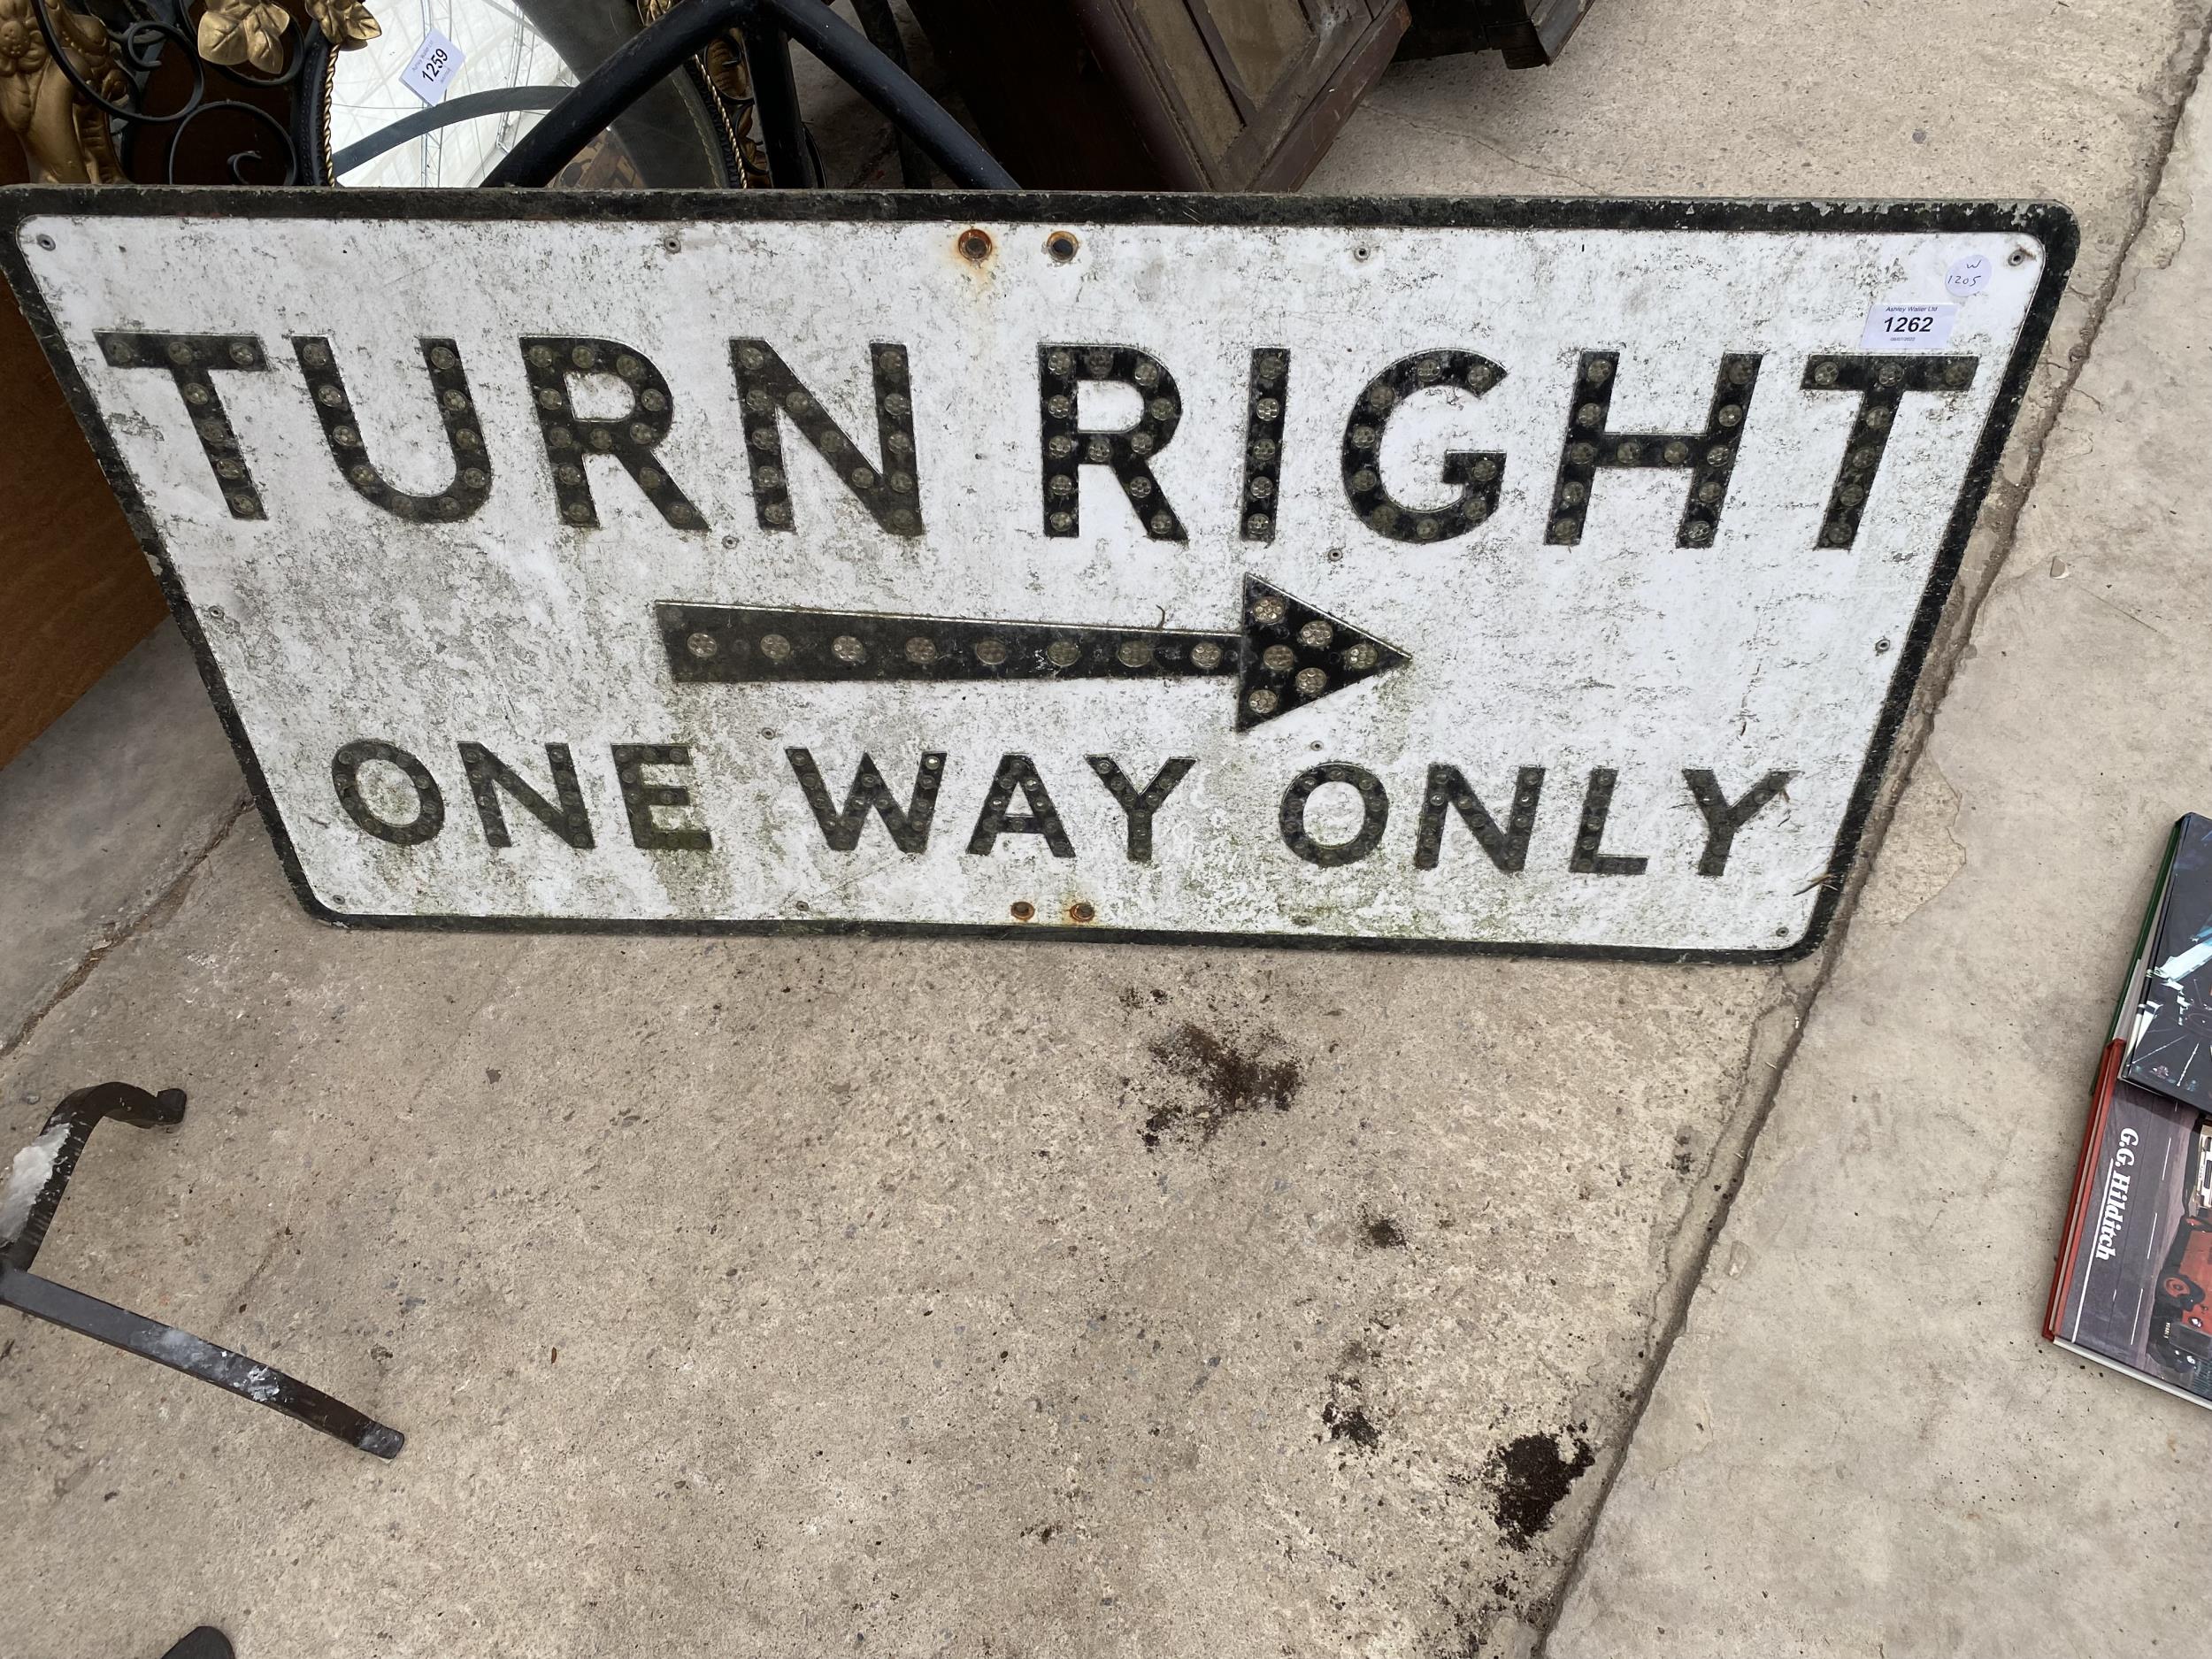 A VINTAGE 'TURN RIGHT ONE WAY ONLY' SIGN